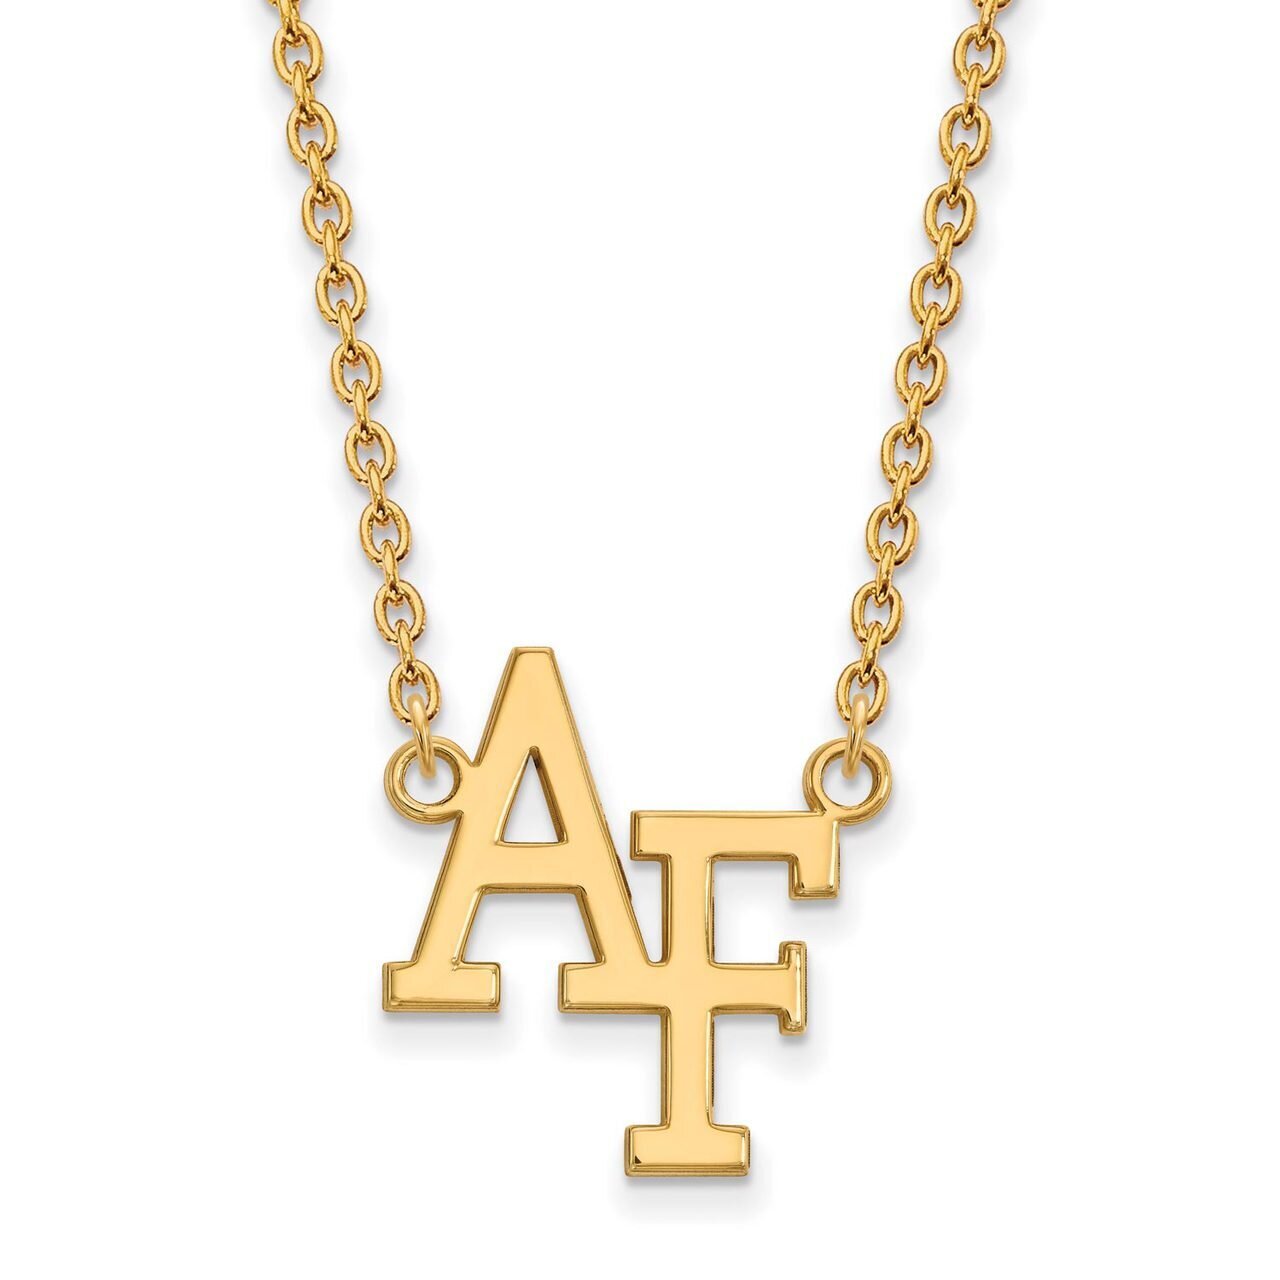 United States Air Force Academy Large Pendant with Chain Necklace 10k Yellow Gold 1Y012USA-18